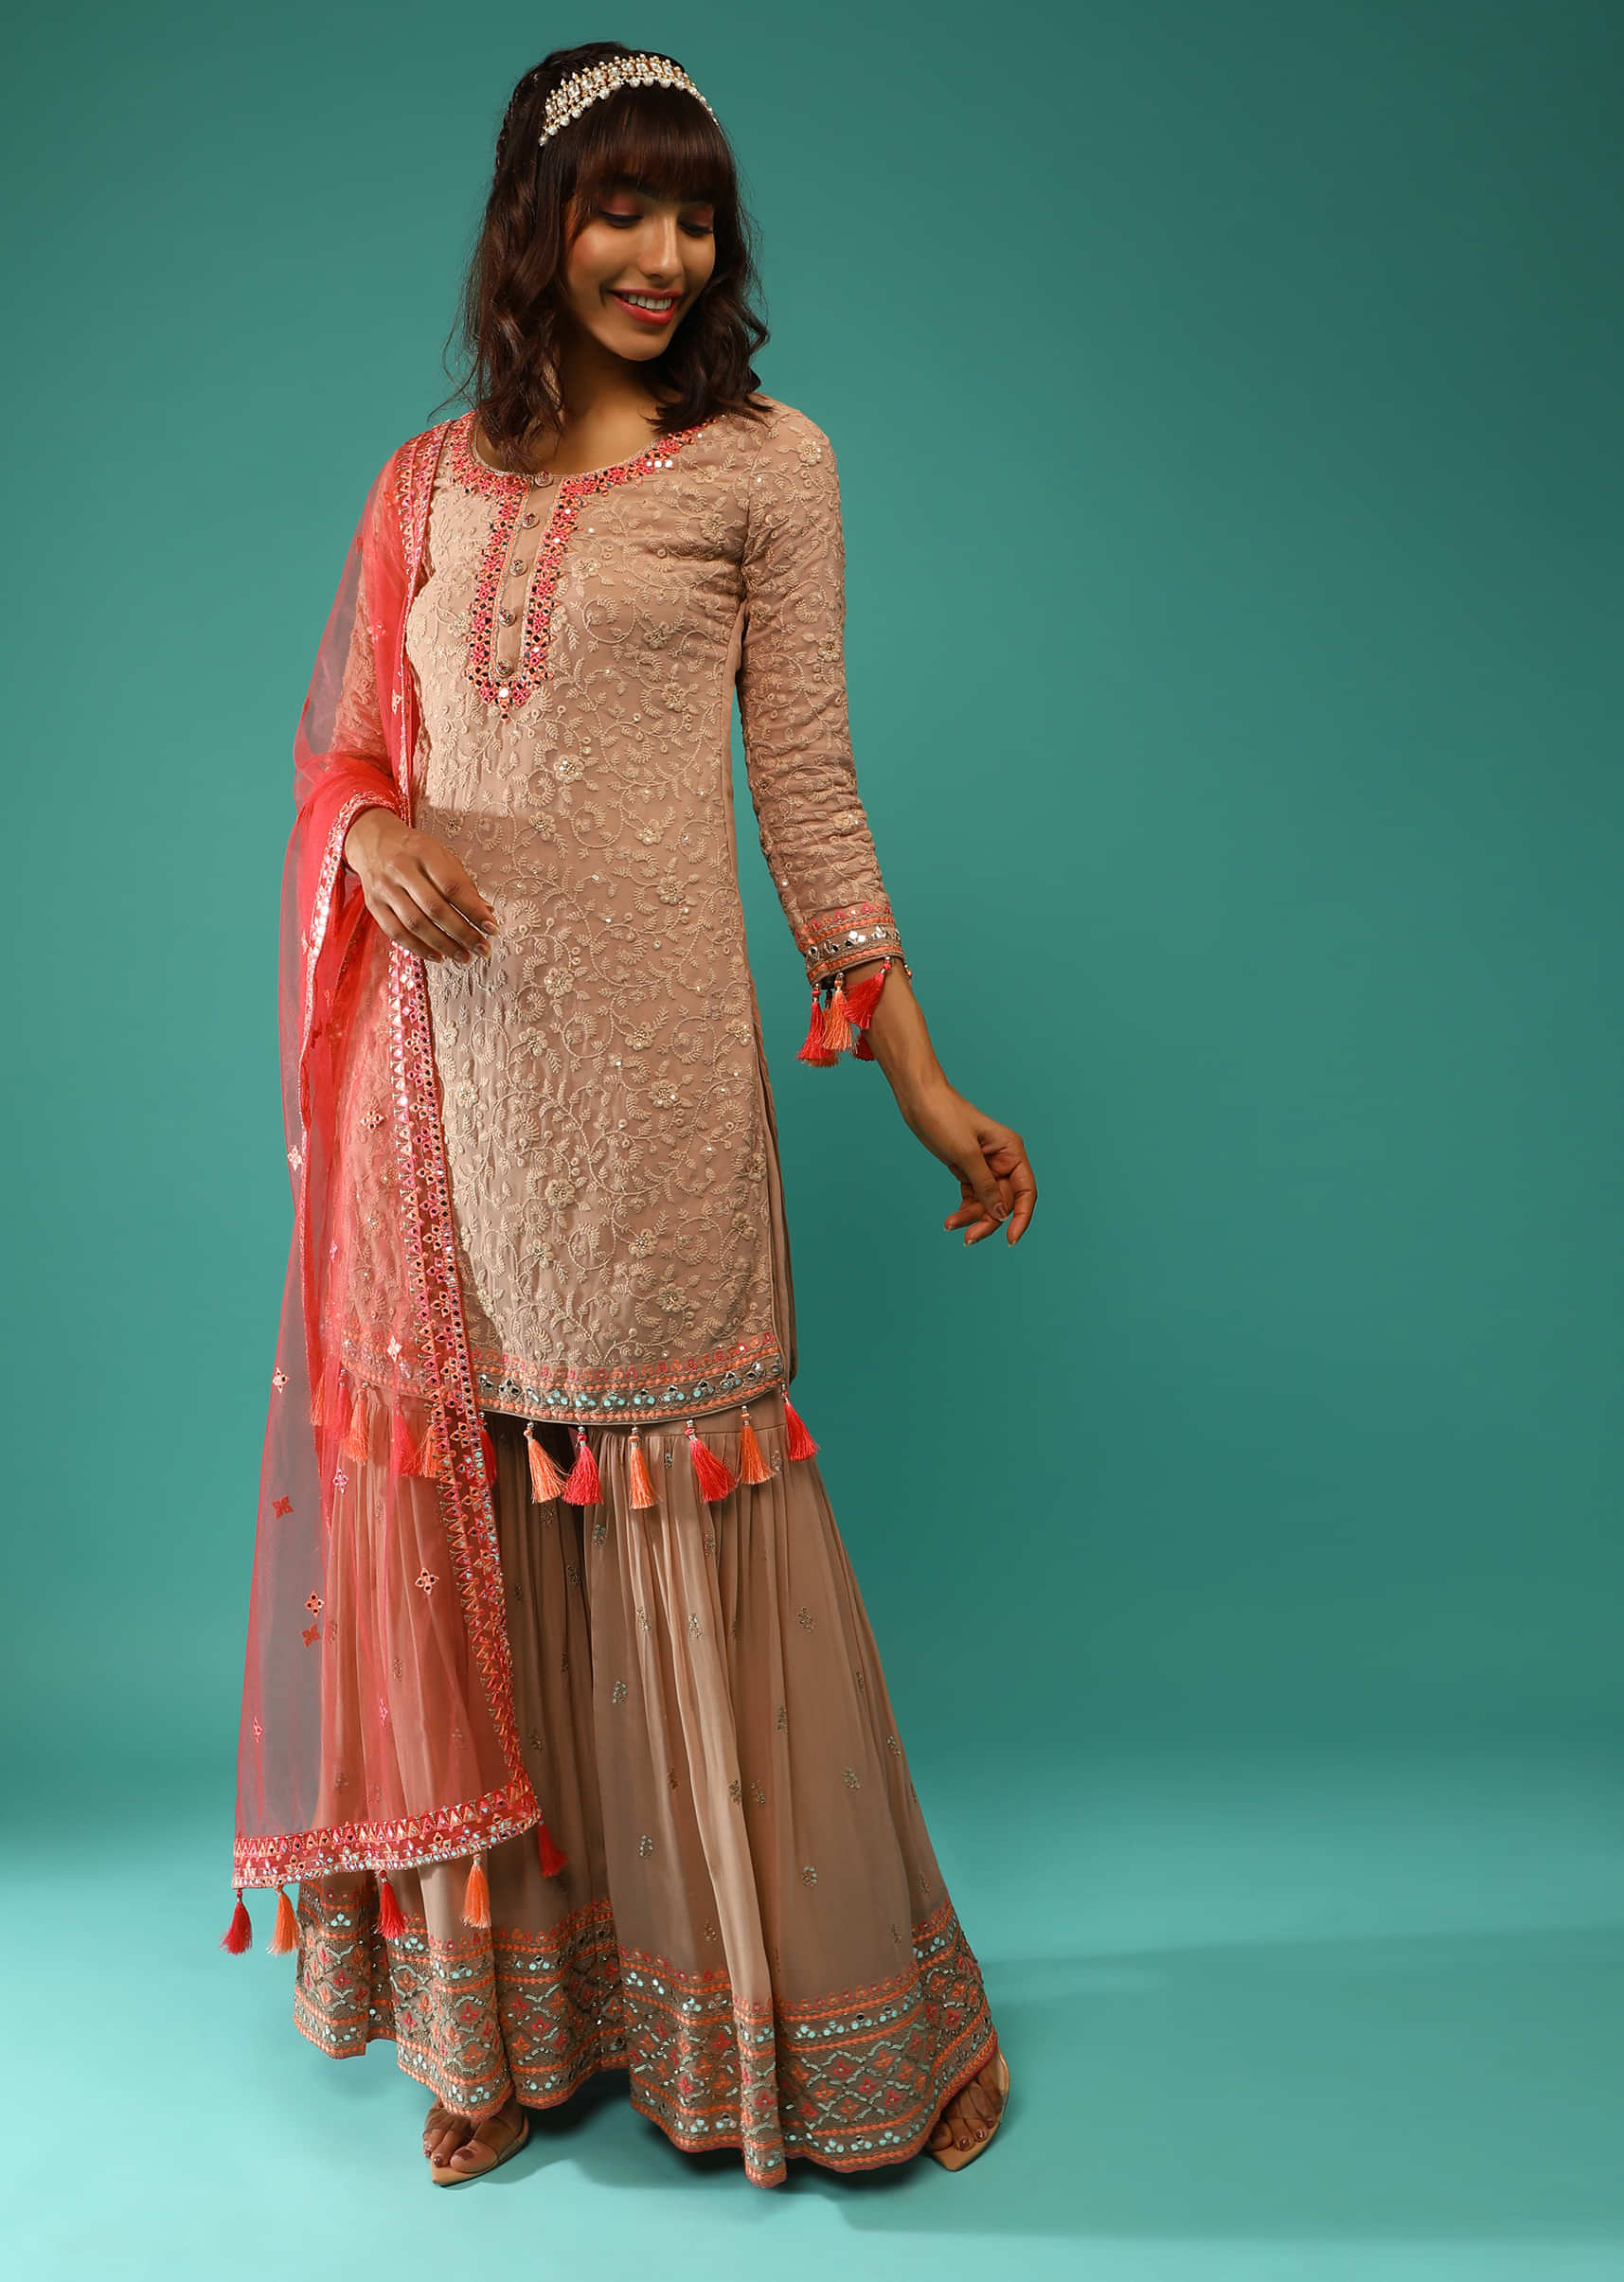 Latte Brown Sharara Suit In Georgette With Lucknowi Jaal Along With Multicolored Mirror Abla And Tassel Detailing  